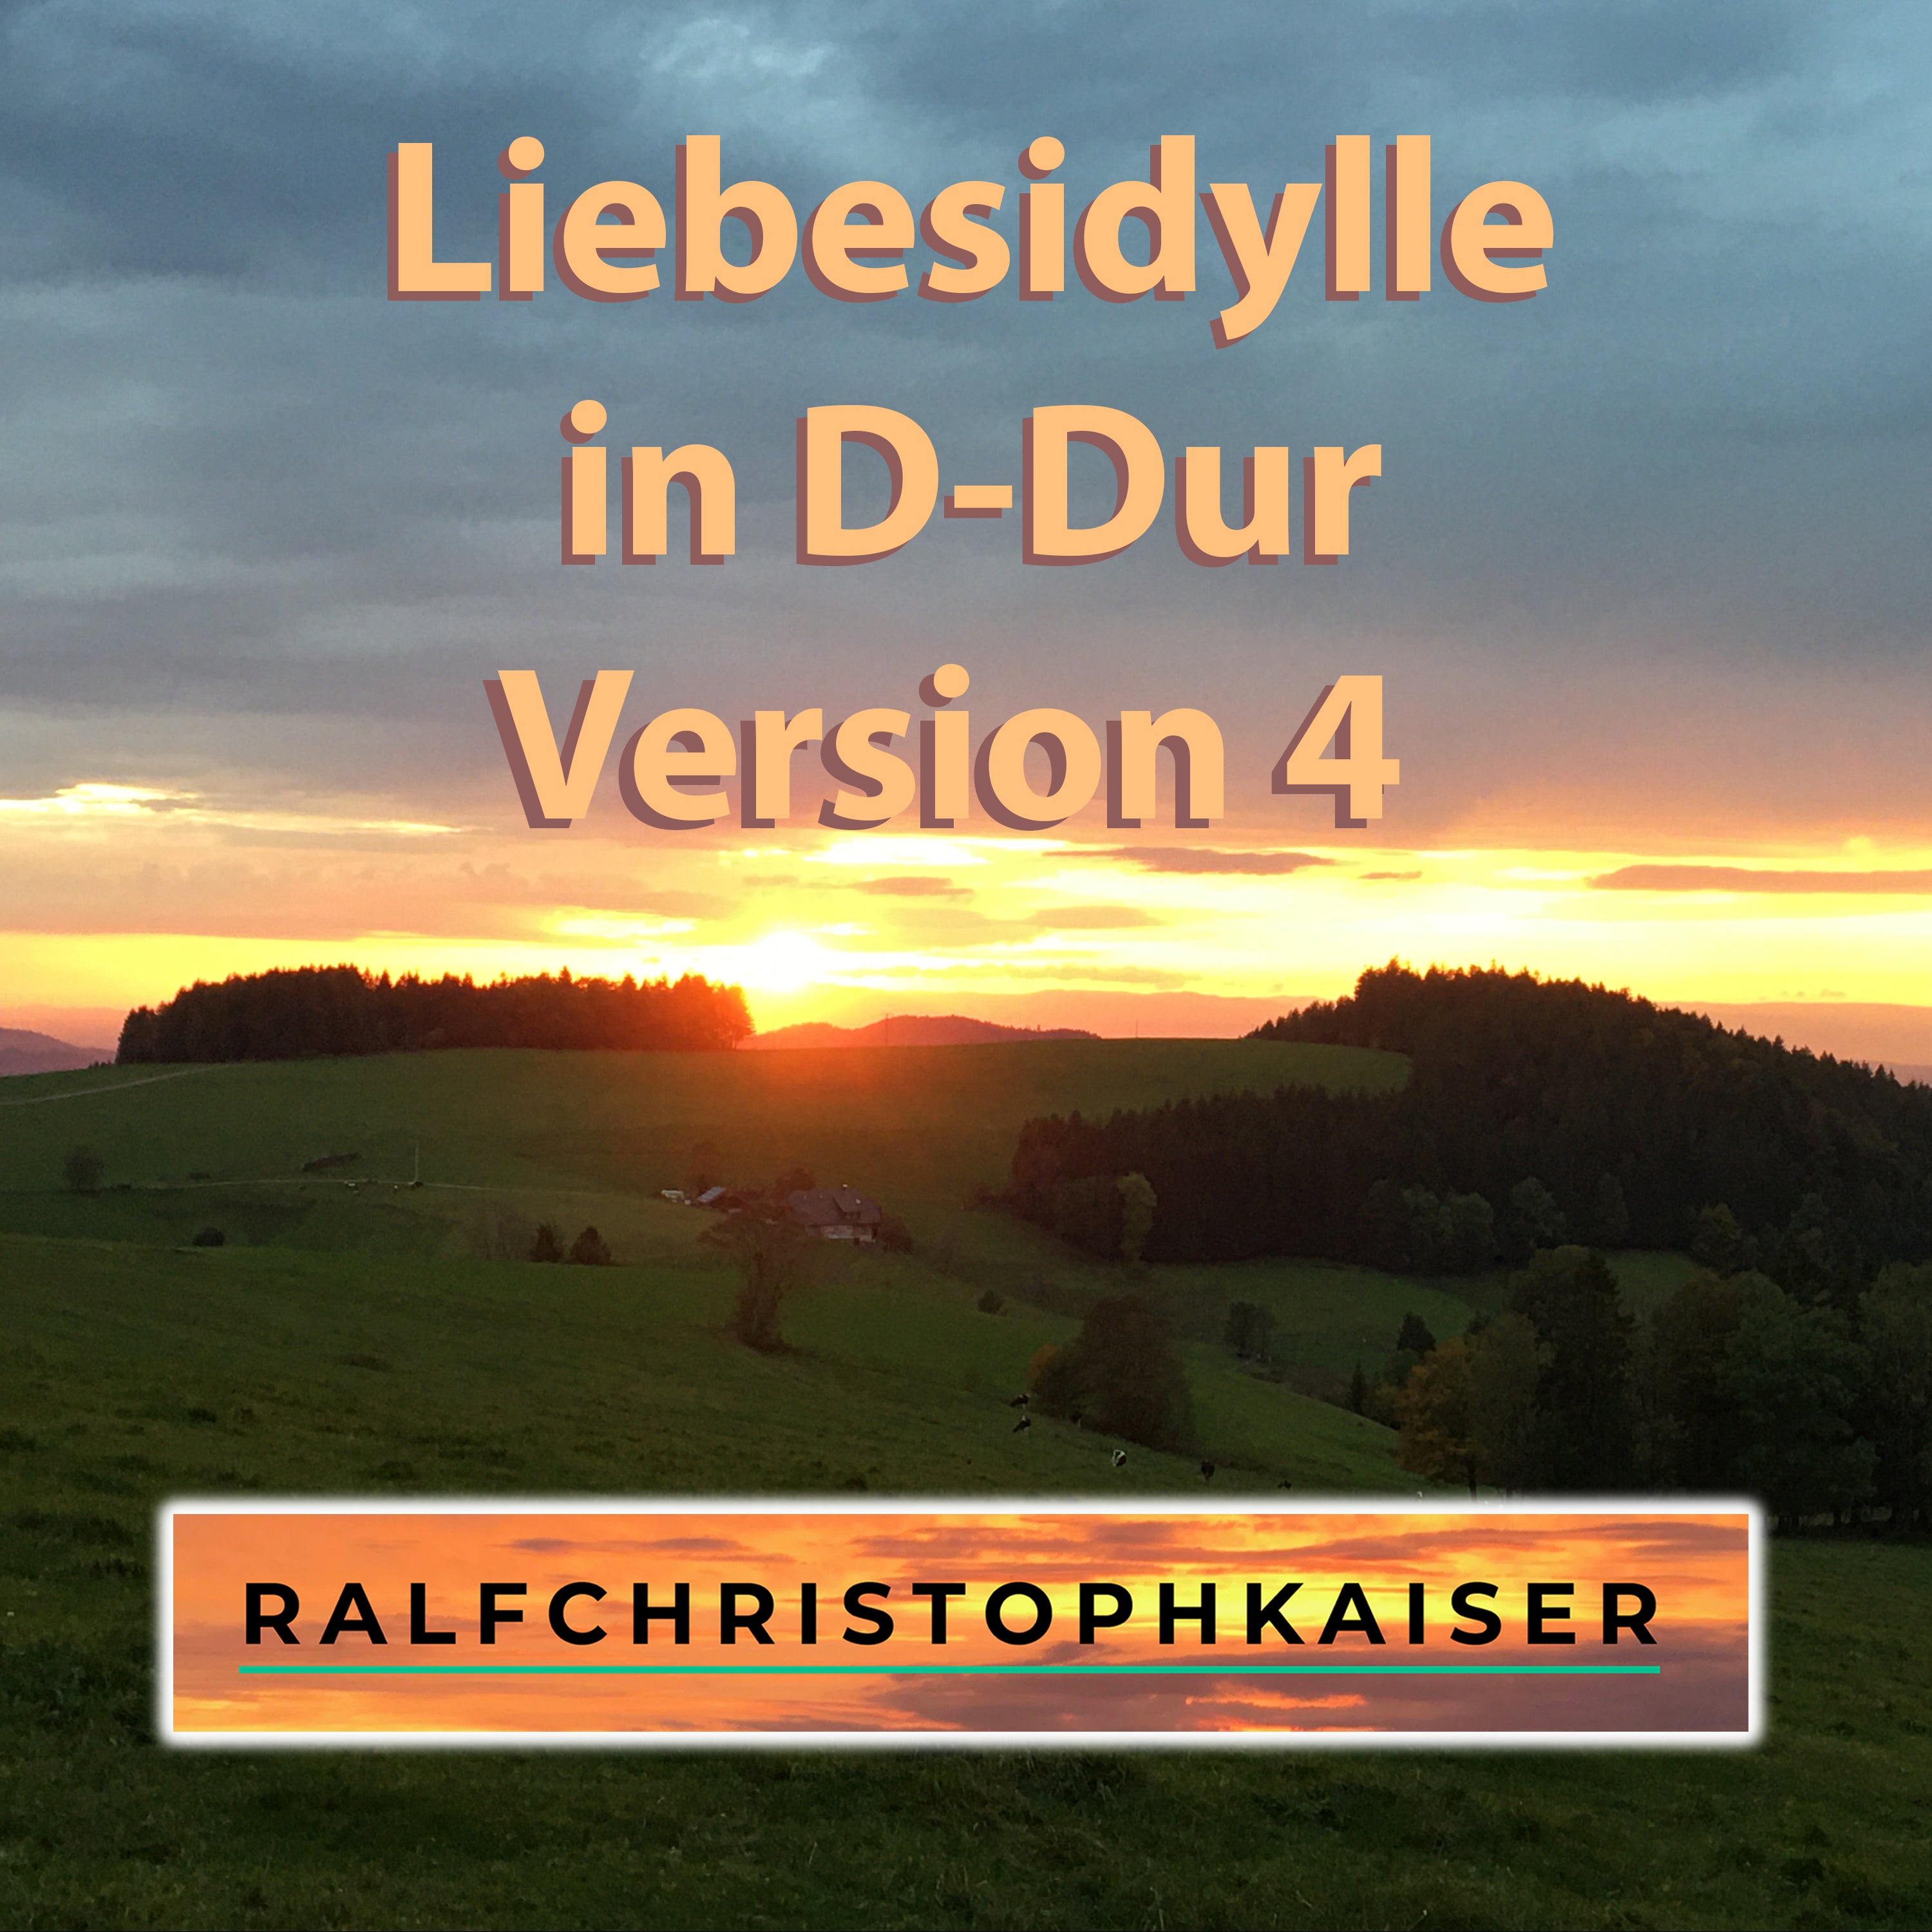 Liebesidylle classical romantic canon in d-major by ralf christoph kaiser full score full orchestra leadsheet and parts and full hd wav file - ralfchristophkaiser.com Musik und Noten